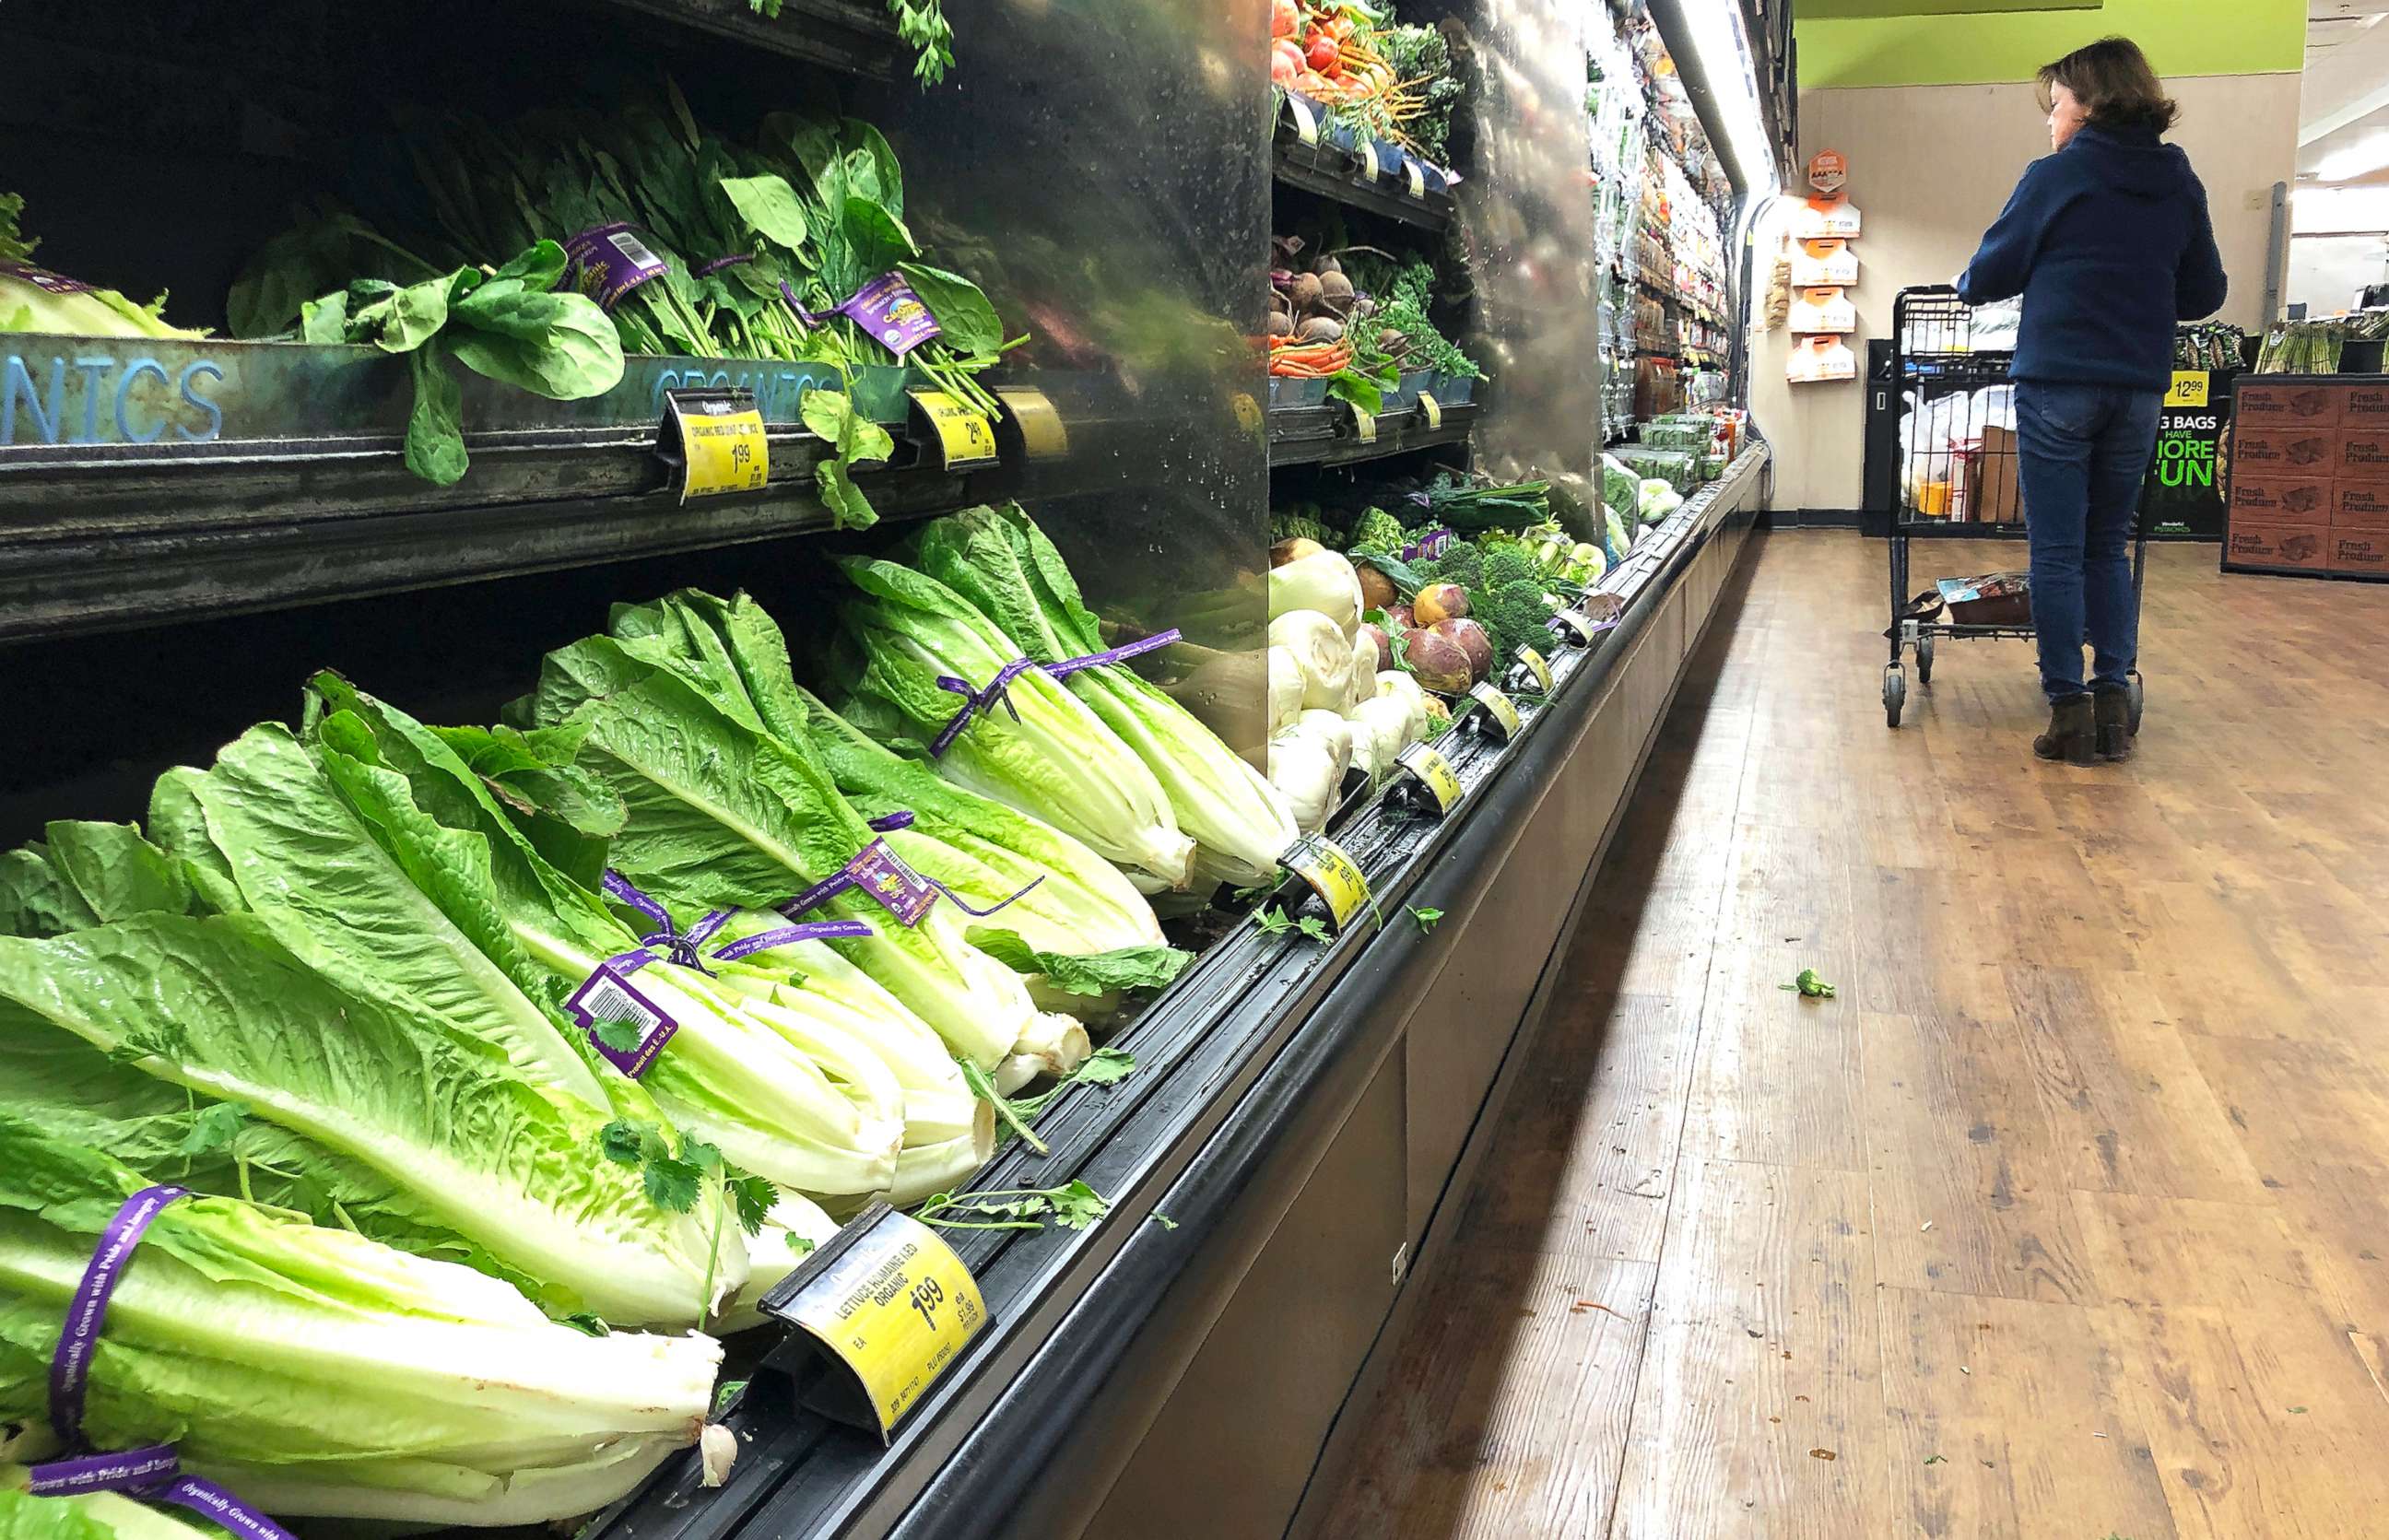 PHOTO: In this Nov. 20, 2018, file photo, romaine lettuce sits on the shelves as a shopper walks through the produce area of an Albertsons market in Simi Valley, Calif.